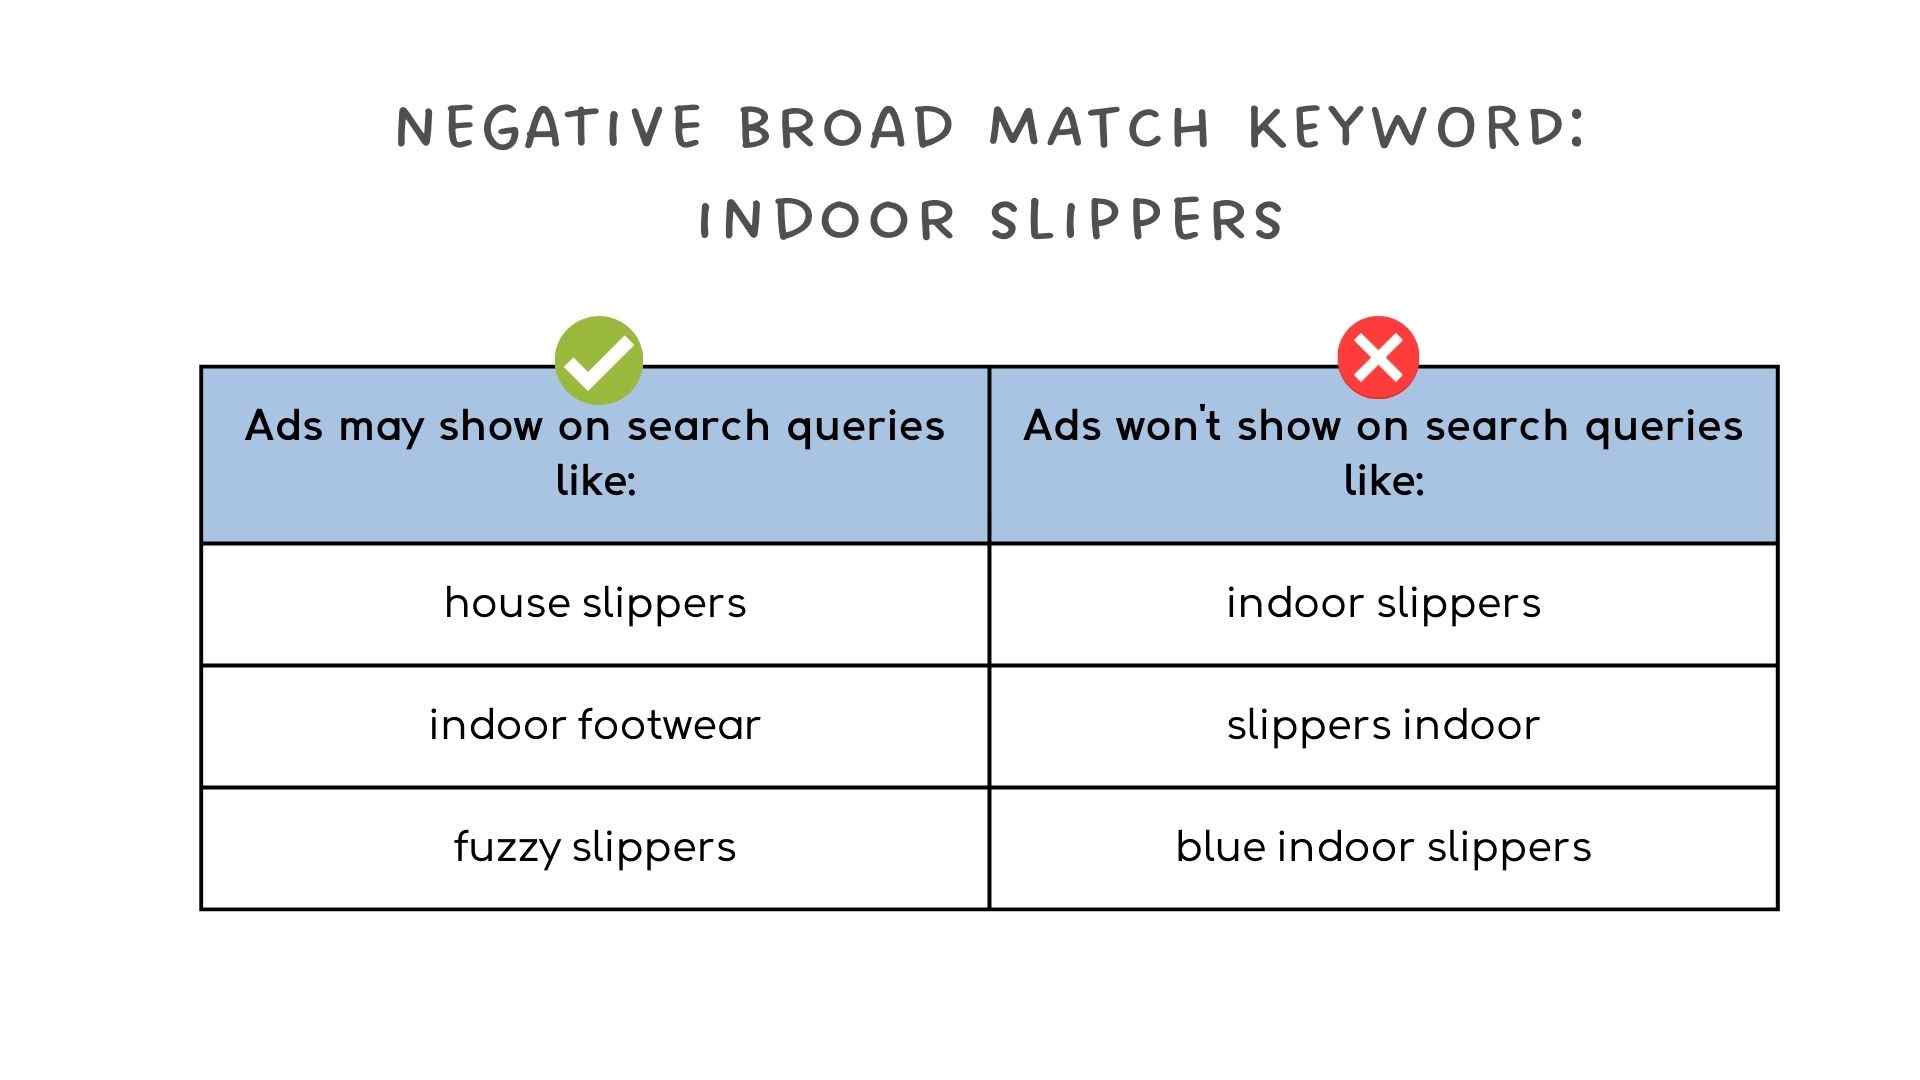 Negative broad match for the keyword "indoor slippers"